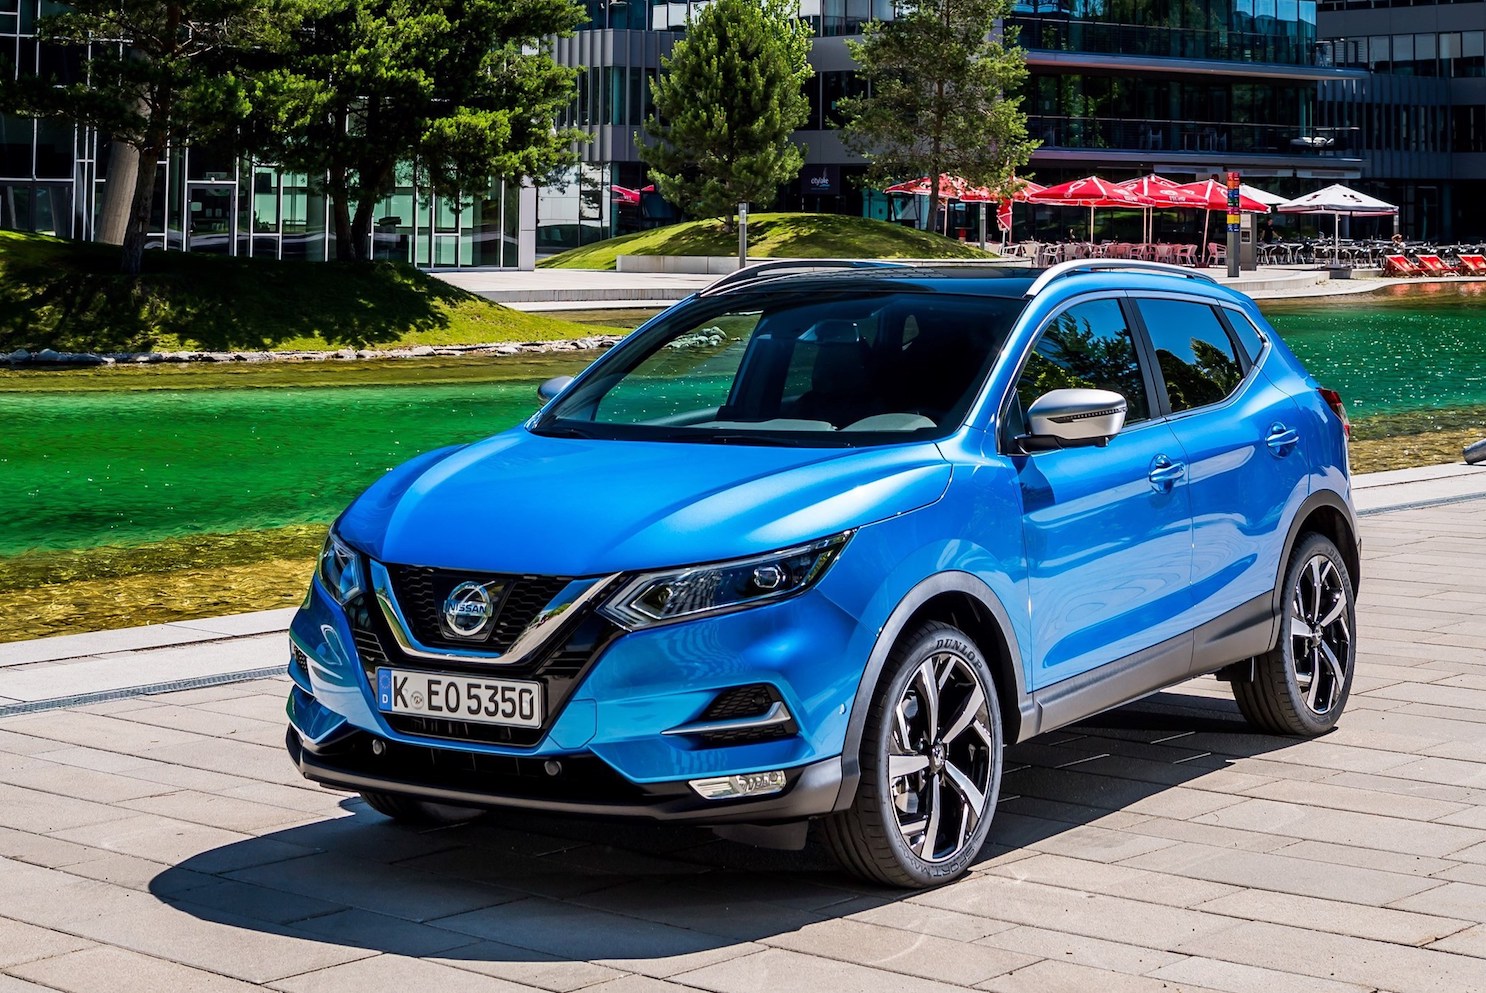 2018 Nissan Qashqai revealed in Euro specification